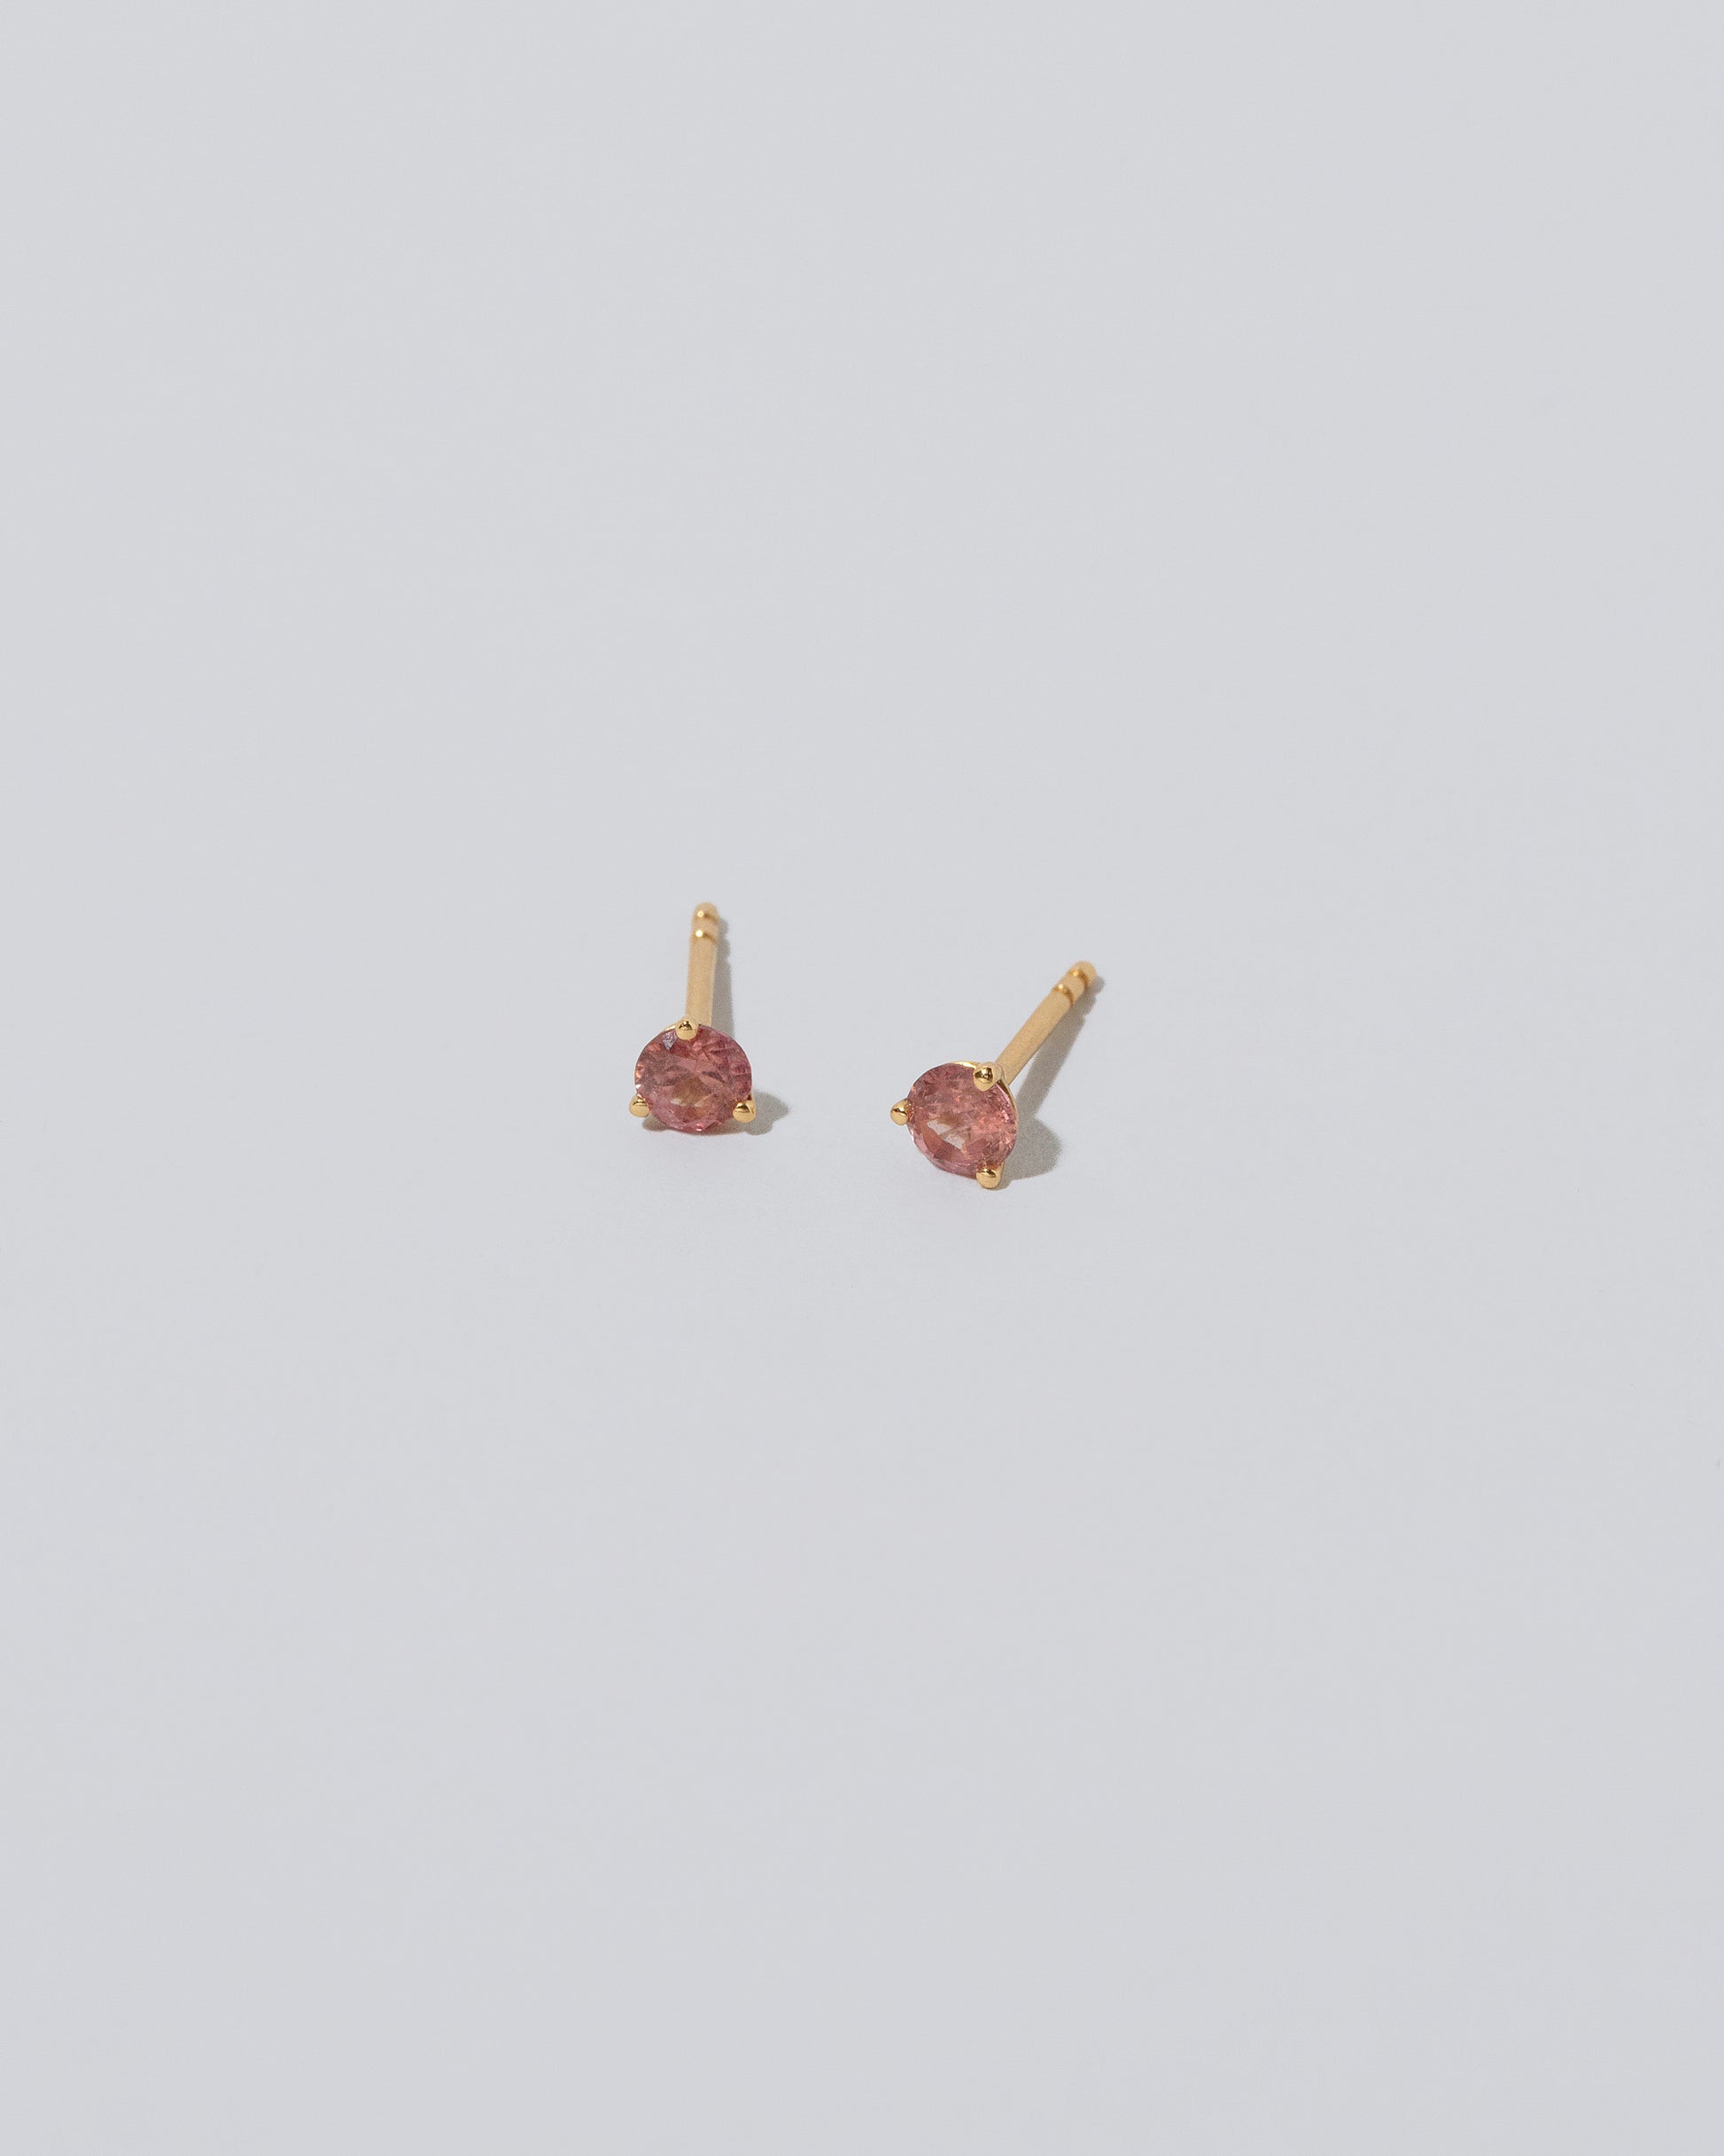 Product photo of Martini Studs - Coral Sapphire on light color background